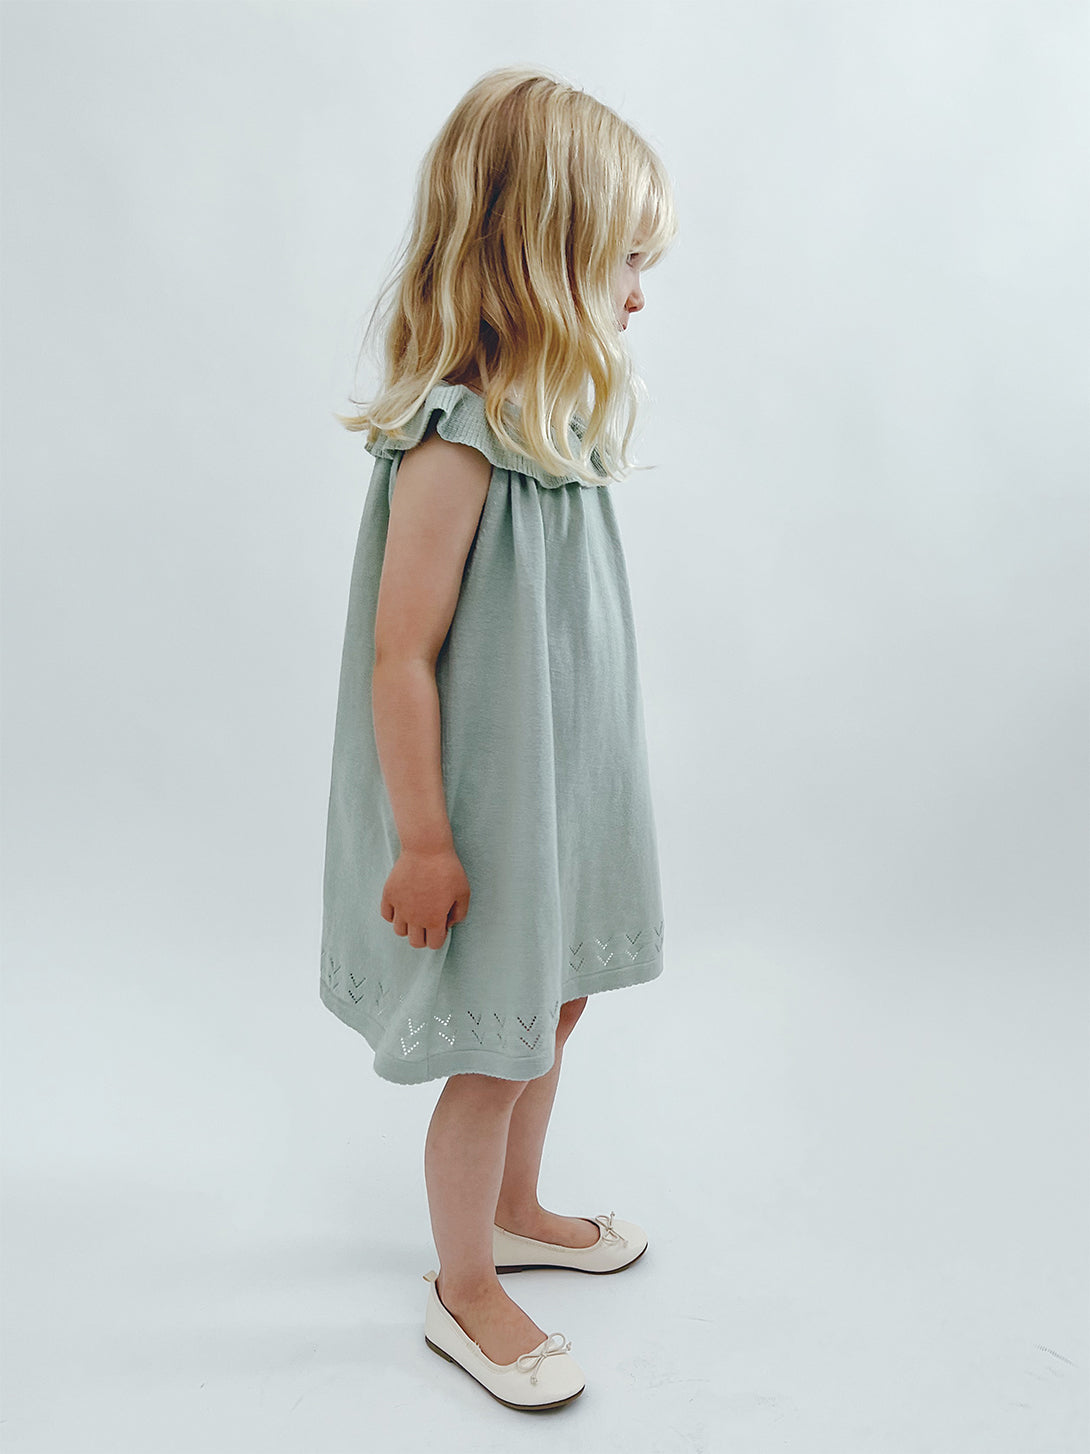 【AS WE GROW】【30%OFF】ELISE DRESS MINT　フリルニットワンピース　18-36m,3-5y,6-8Y  | Coucoubebe/ククベベ